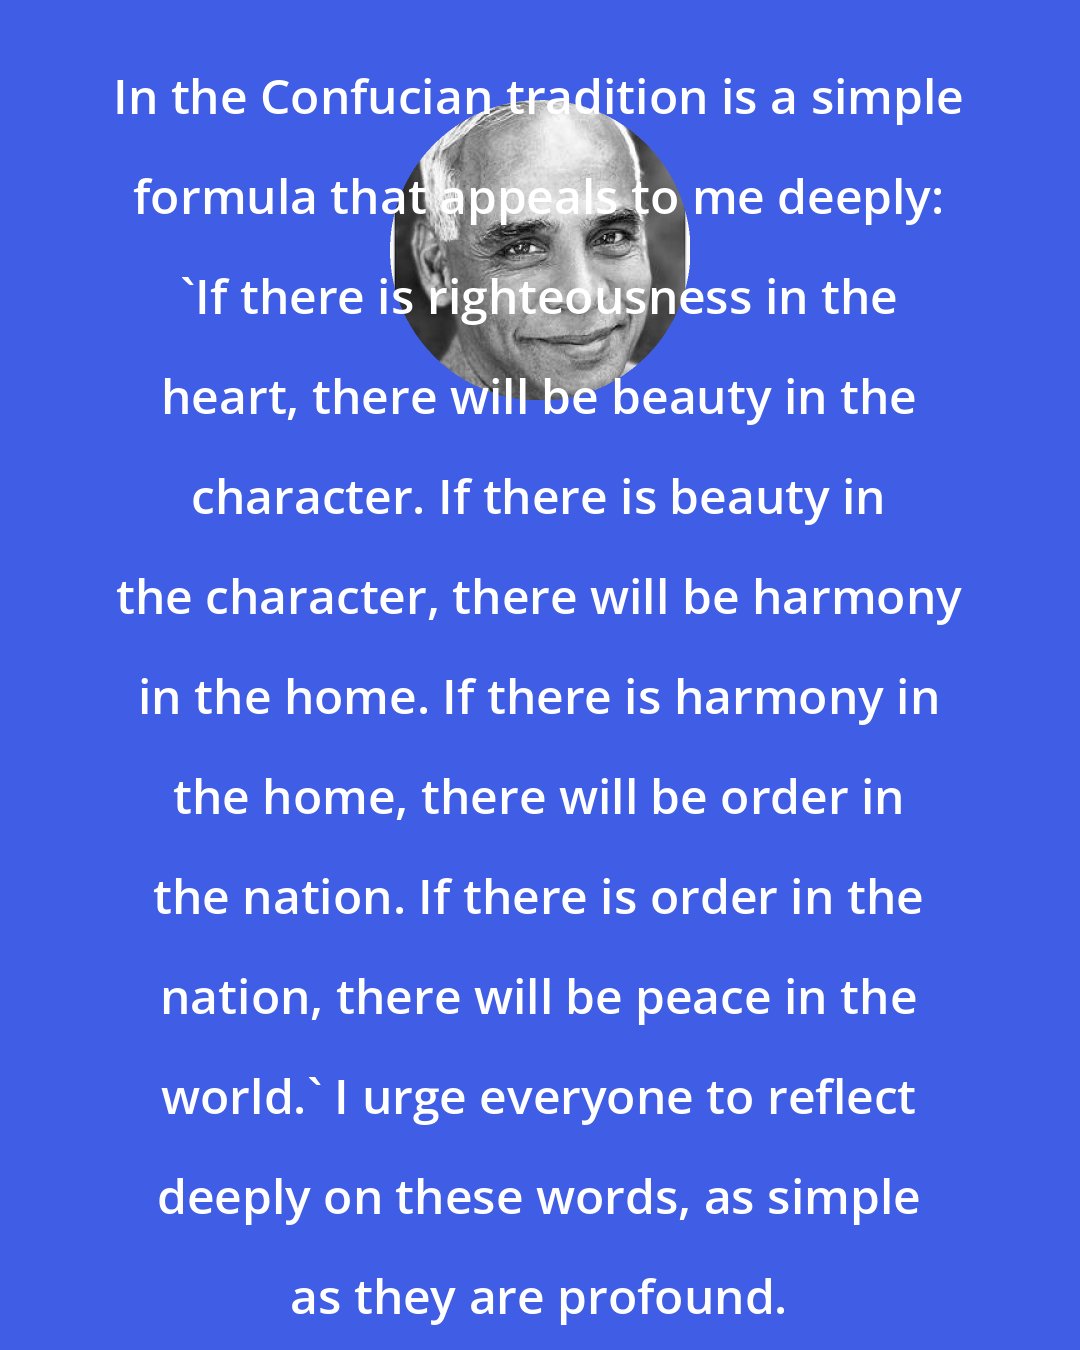 Eknath Easwaran: In the Confucian tradition is a simple formula that appeals to me deeply: 'If there is righteousness in the heart, there will be beauty in the character. If there is beauty in the character, there will be harmony in the home. If there is harmony in the home, there will be order in the nation. If there is order in the nation, there will be peace in the world.' I urge everyone to reflect deeply on these words, as simple as they are profound.